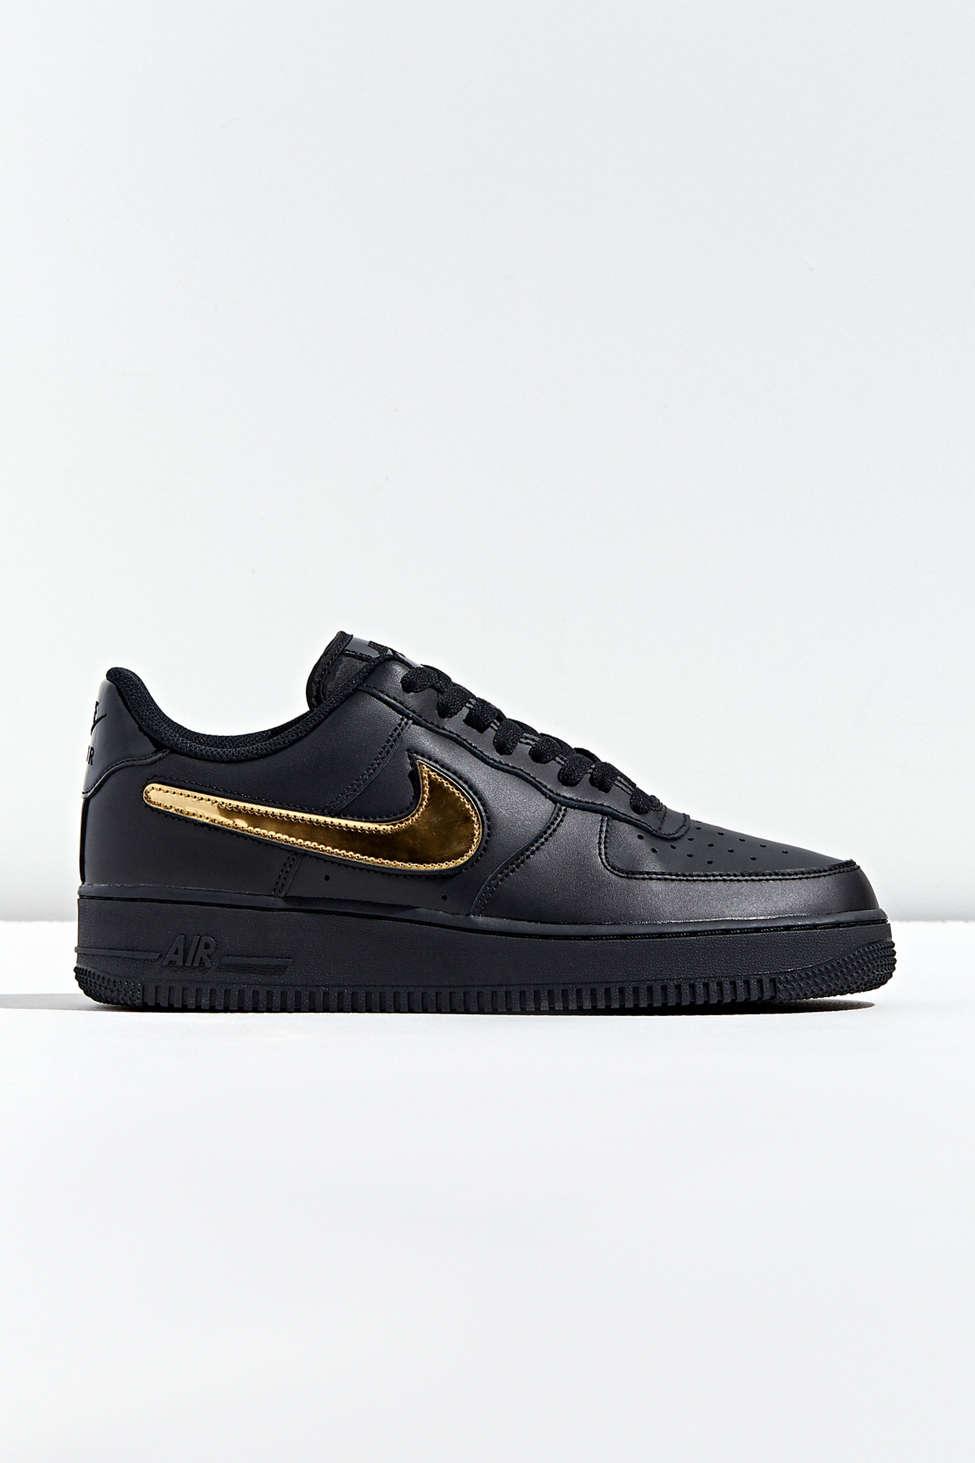 air force 1 swoosh patches